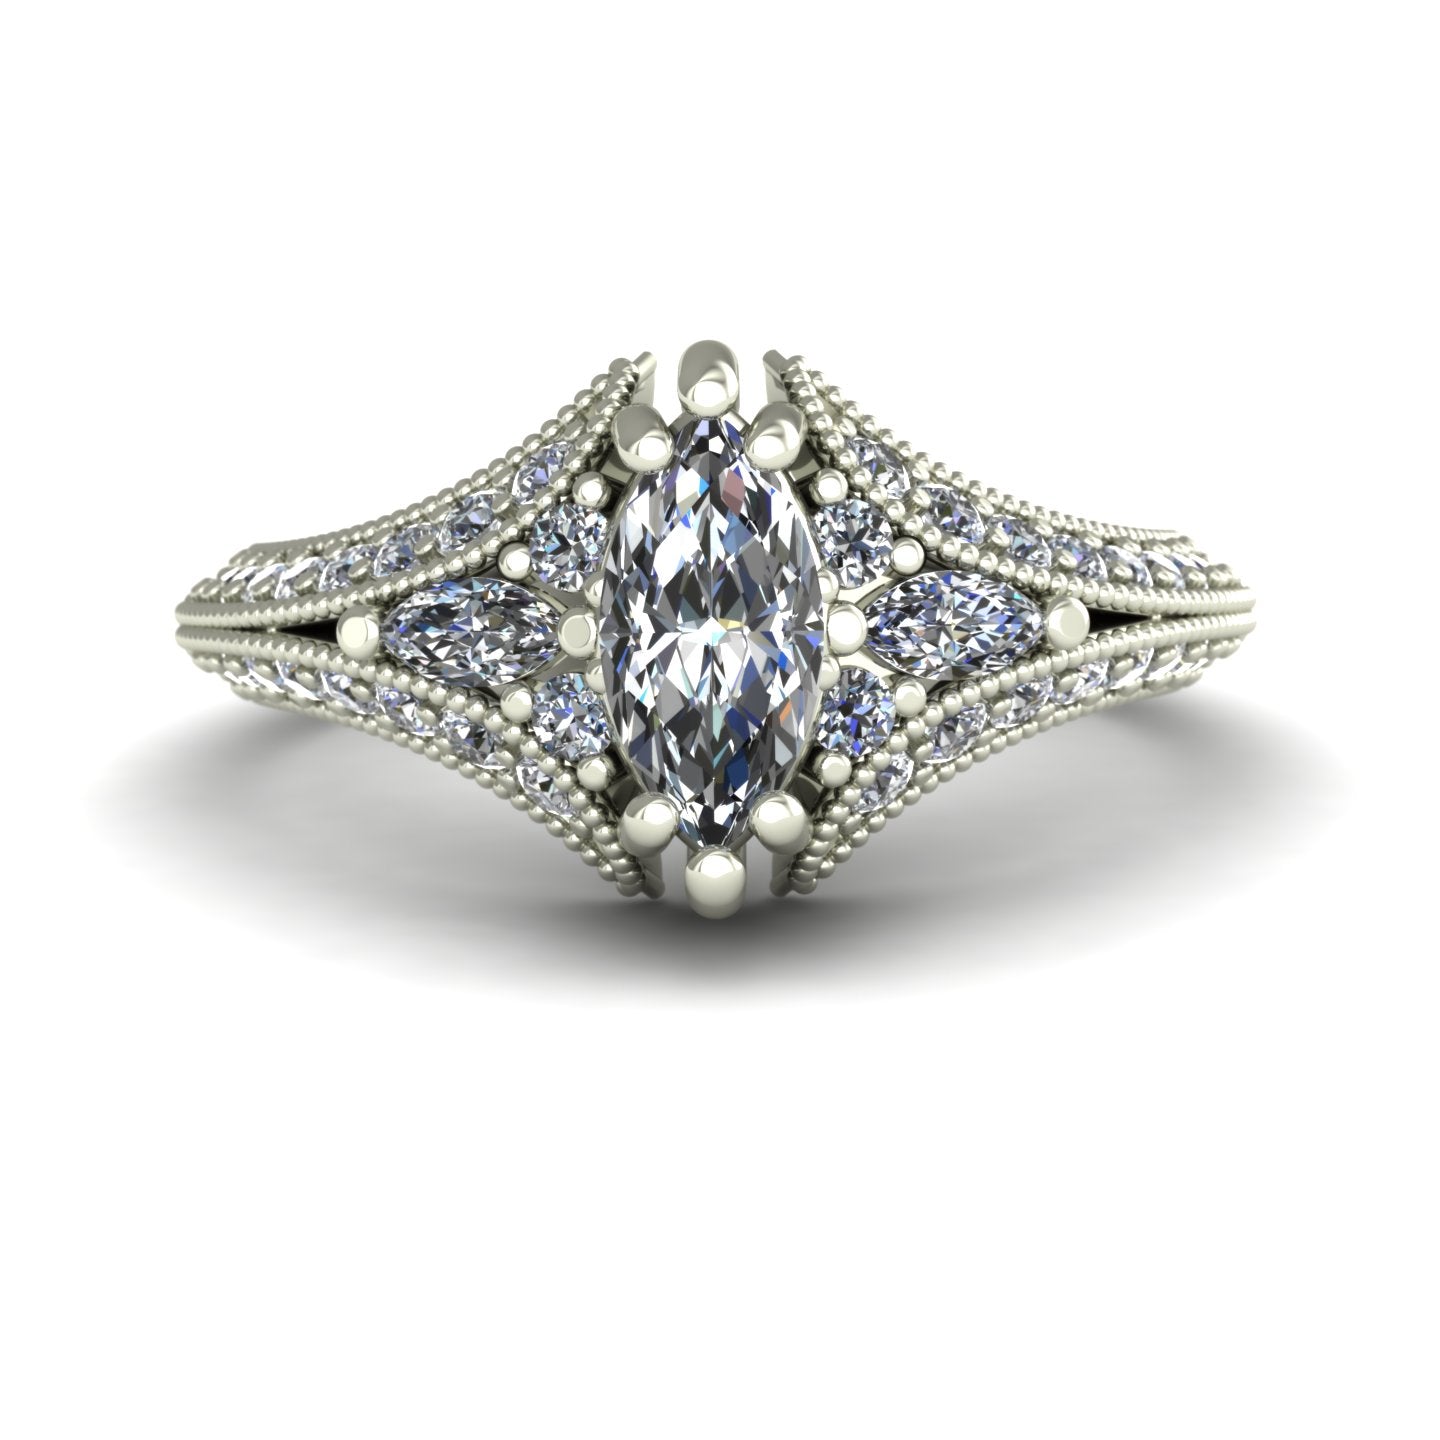 half carat marquise diamond engagement ring in 14k white gold - Charles Babb Designs - top view